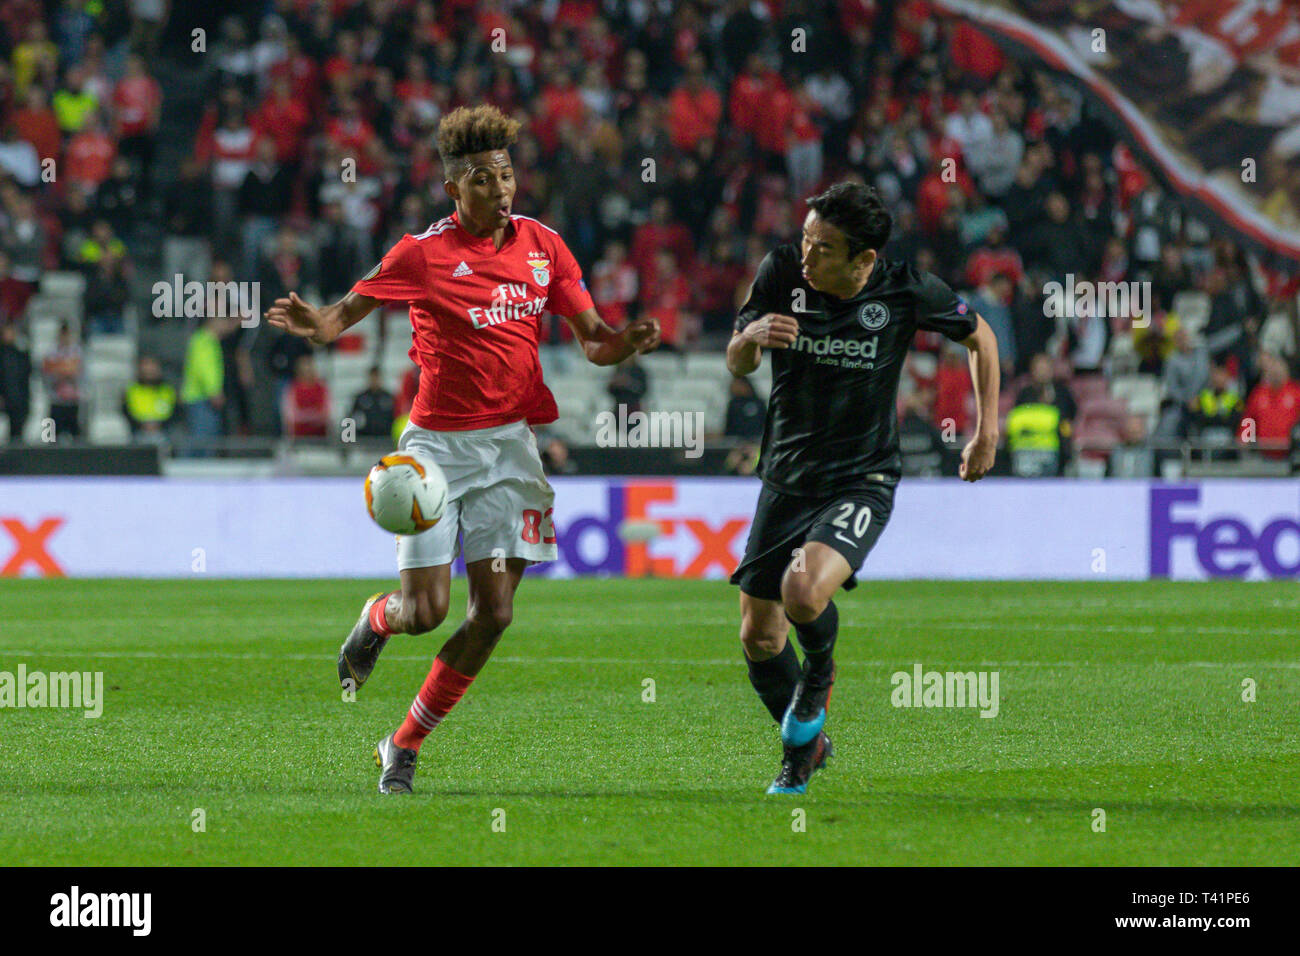 April 11, 2019. Lisbon, Portugal. Benfica's midfielder from Portugal Gedson Fernandes (83) and Eintracht Frankfurt's defender from Japan Makoto Hasebe (20) in action during the game of the UEFA Europa League, Quarter Finals, SL Benfica vs Eintracht Frankfurt © Alexandre de Sousa/Alamy Live News Stock Photo